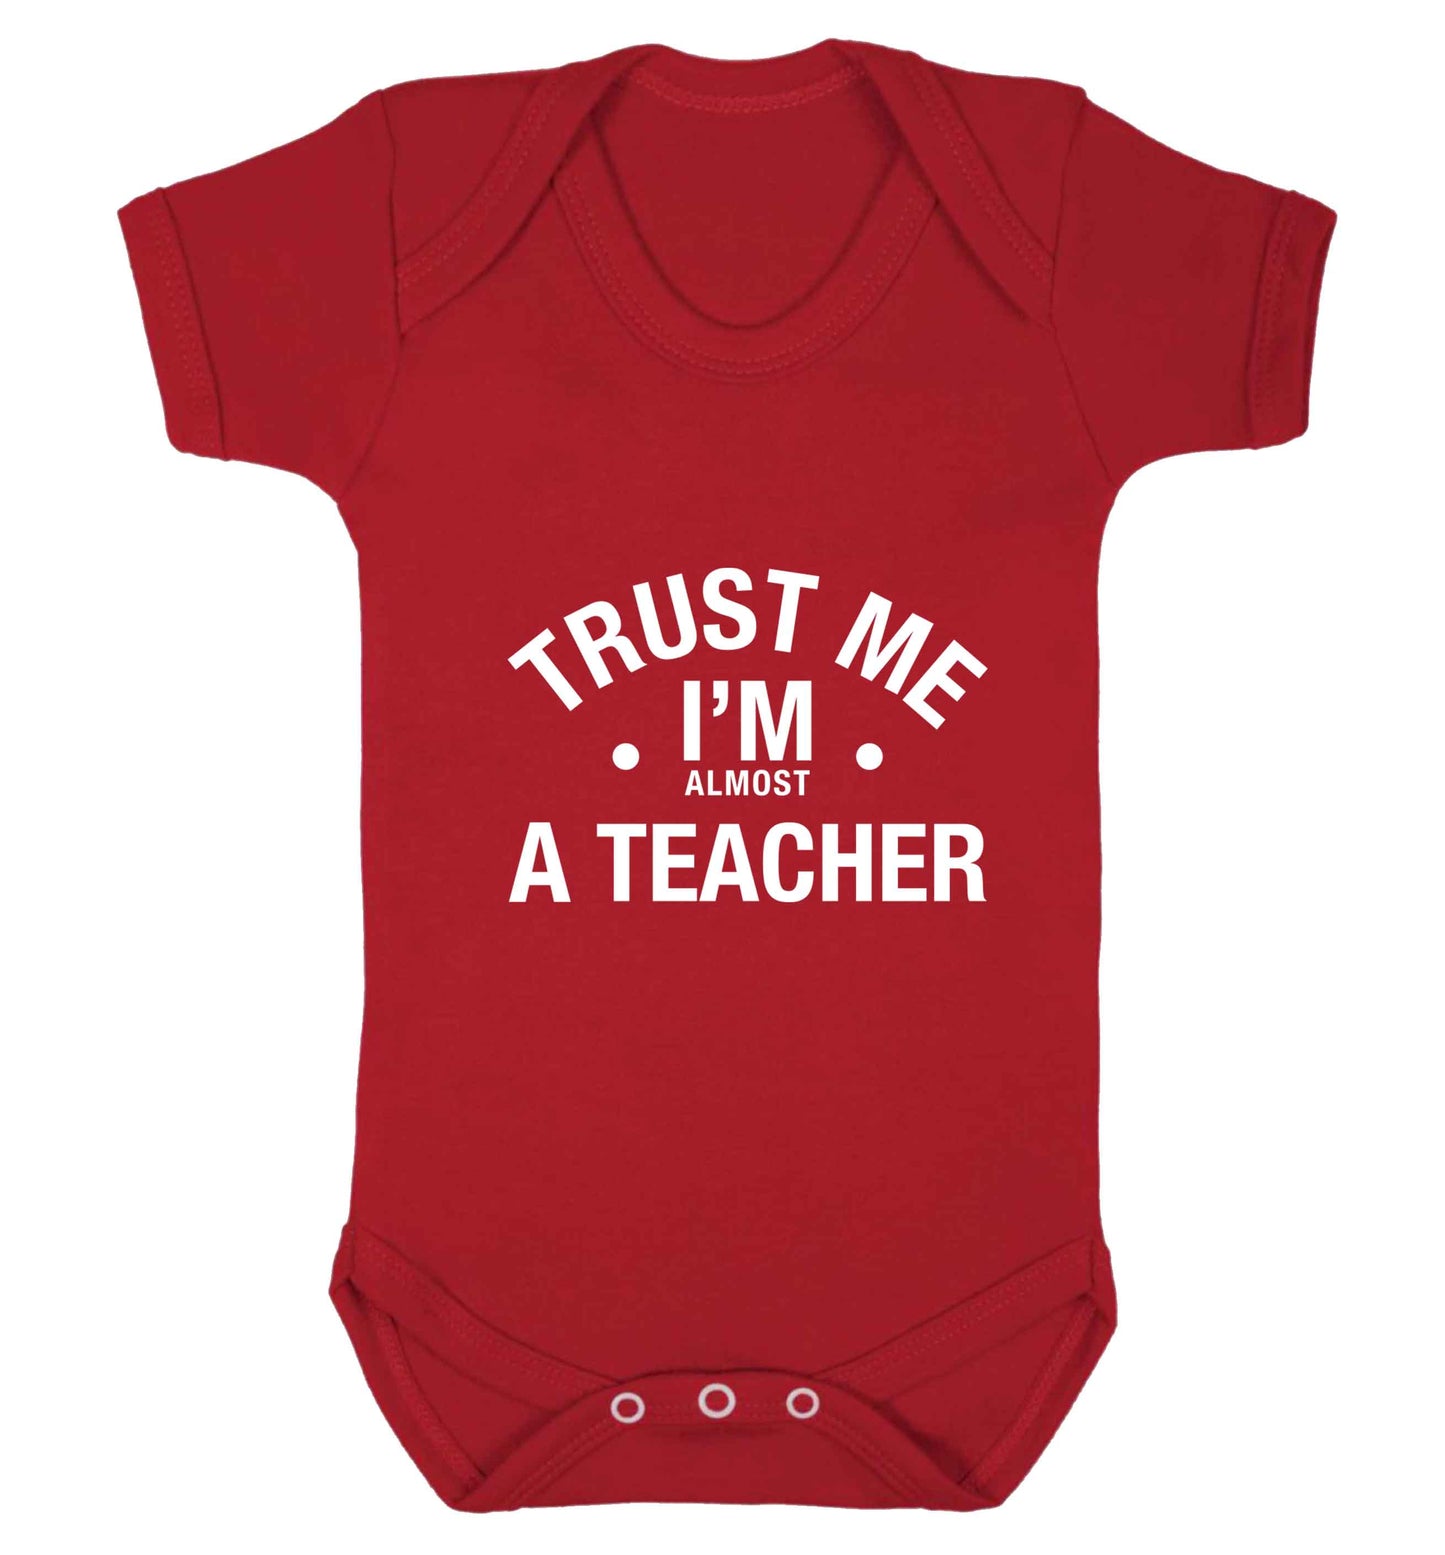 Trust me I'm almost a teacher baby vest red 18-24 months